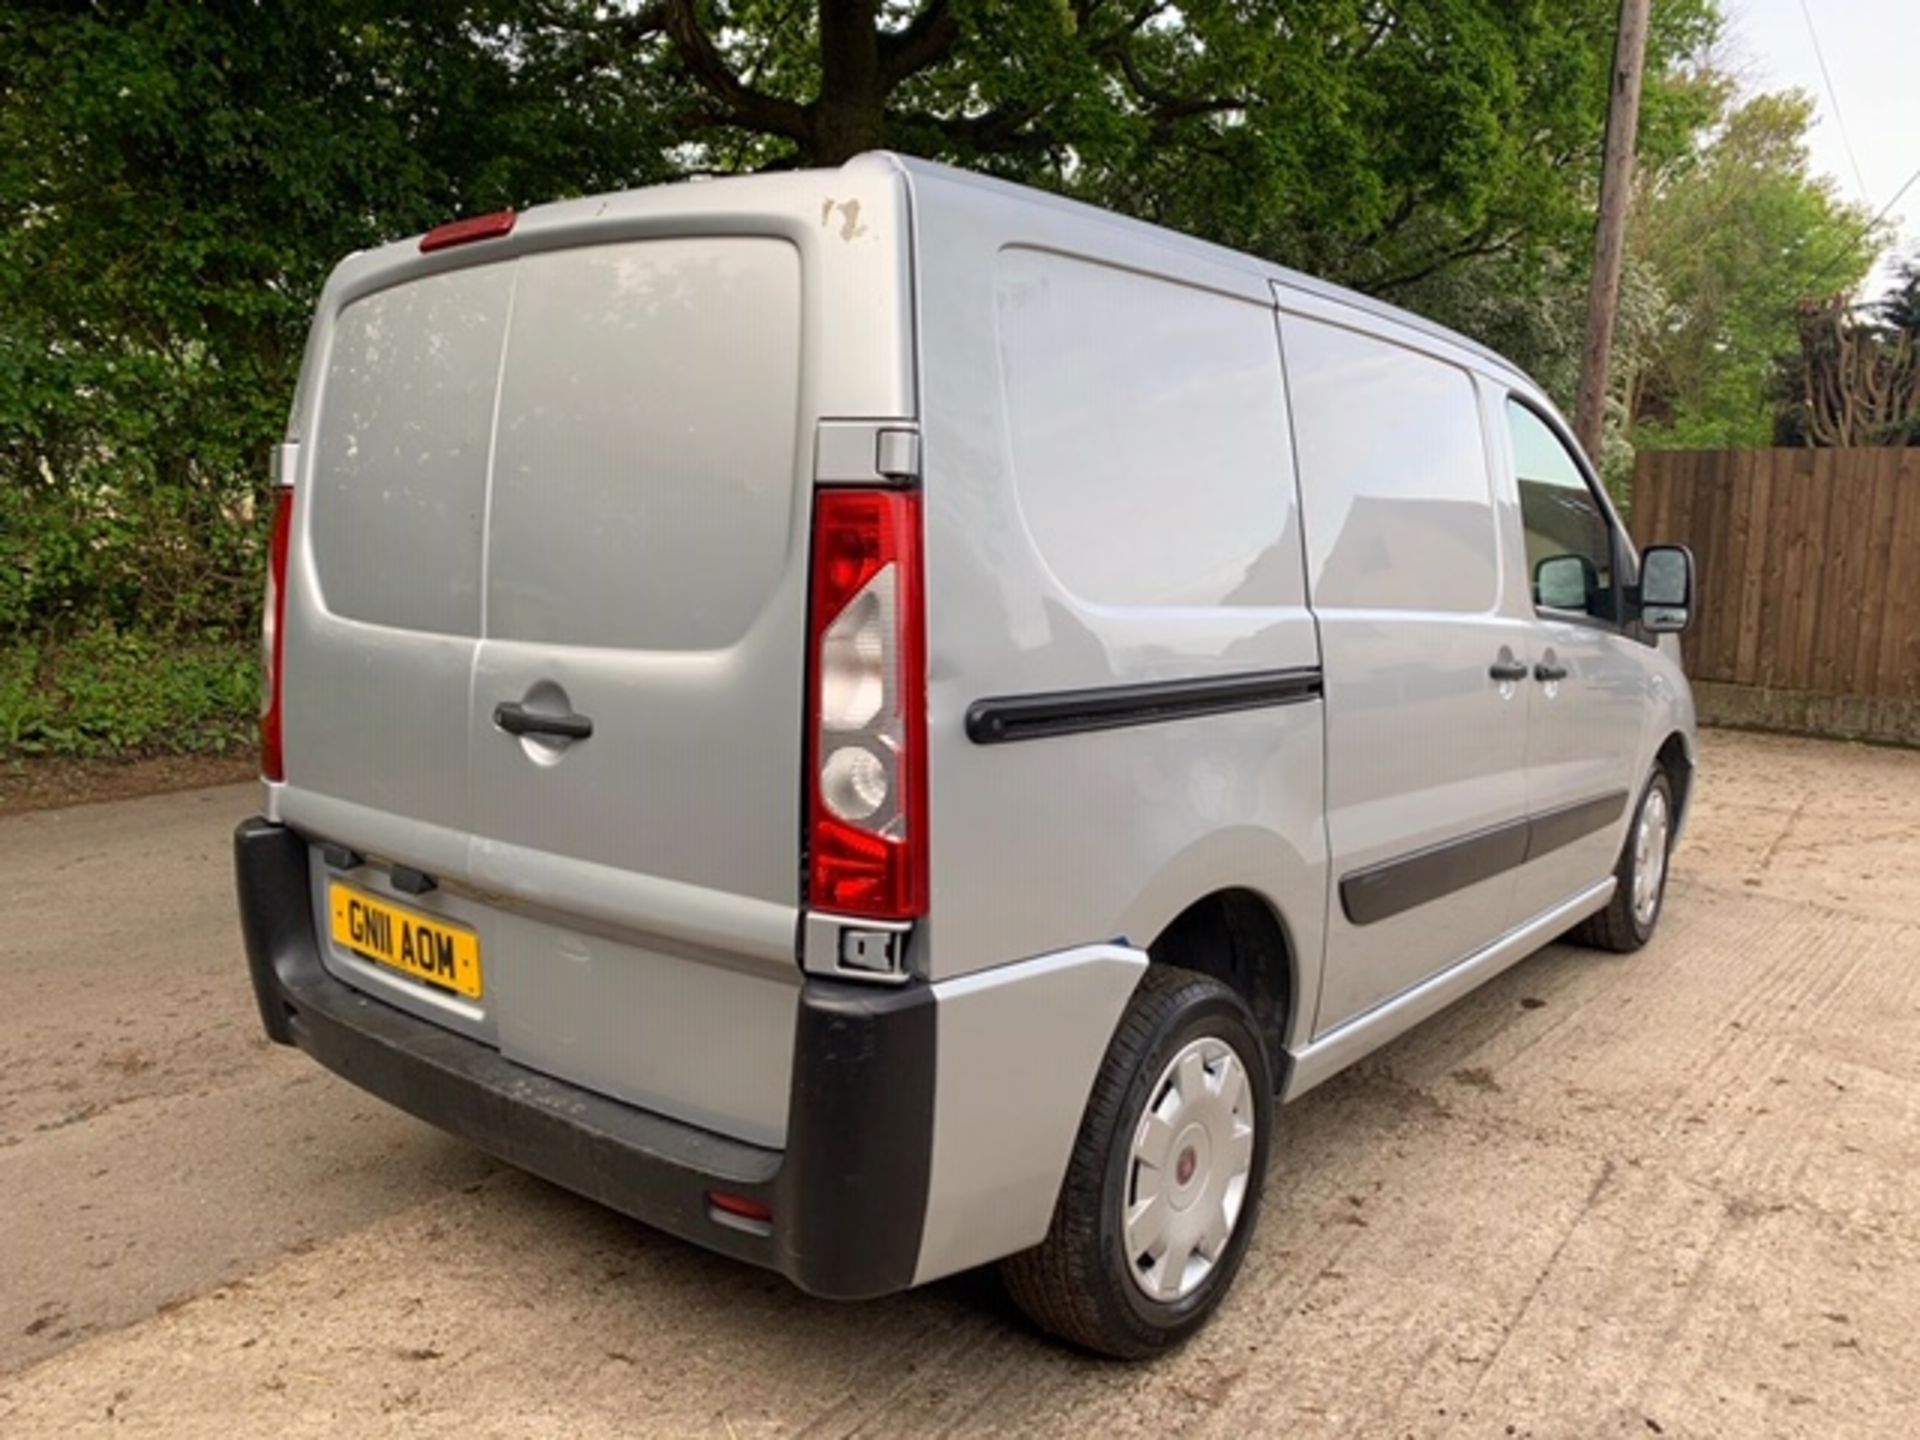 FIAT SCUDO PANEL VAN. YEAR 2011 1.6HDI ENGINE SOLD WITH A FULL MOT WITH V5 TWIN SIDE LOADING - Image 3 of 9